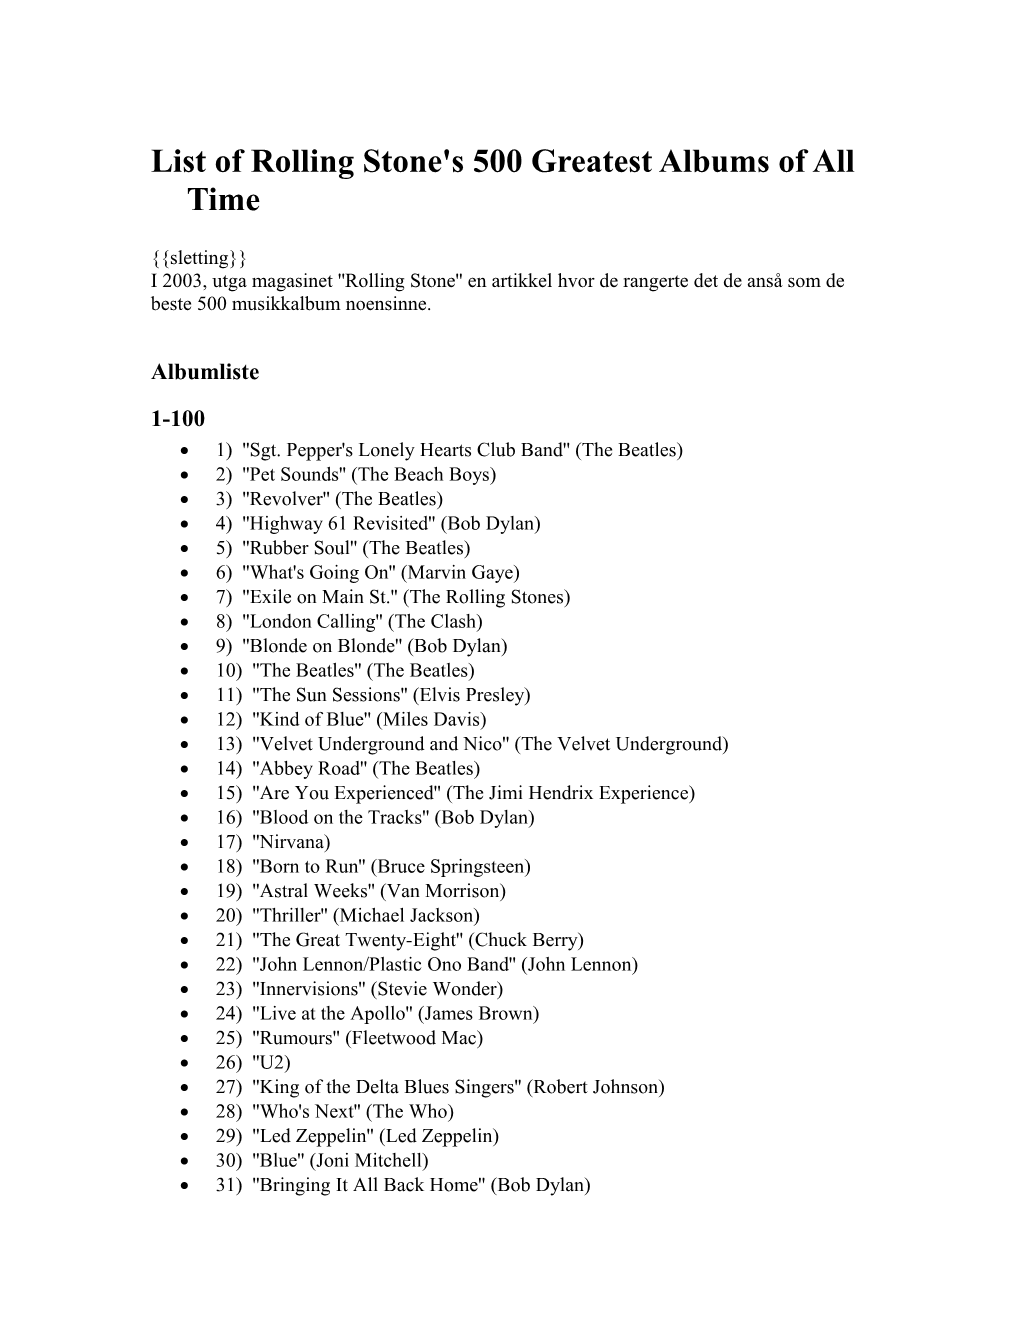 List of Rolling Stone's 500 Greatest Albums of All Time